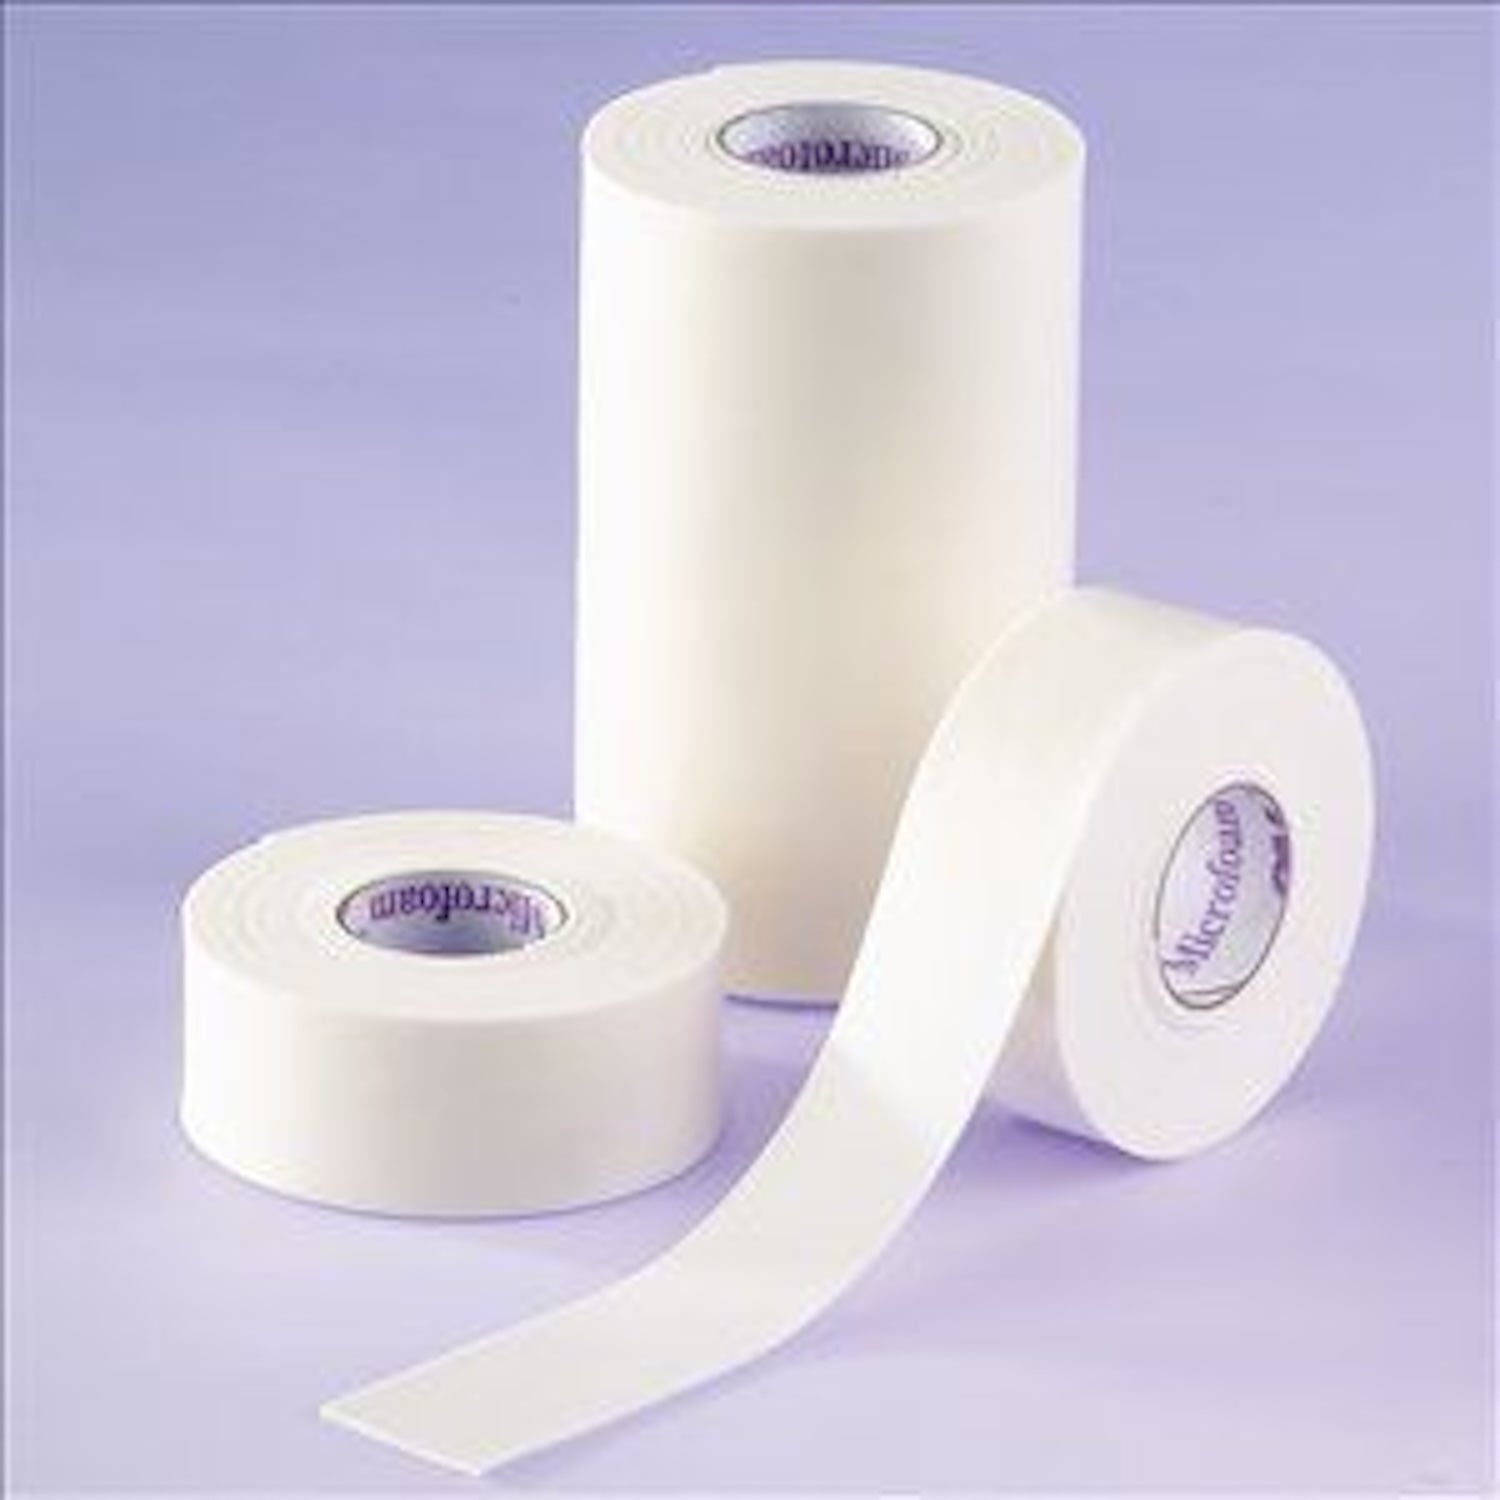 3M Microfoam Surgical Tape | 2.5cm x 5m | Pack of 12 | Short Expiry Date (3)